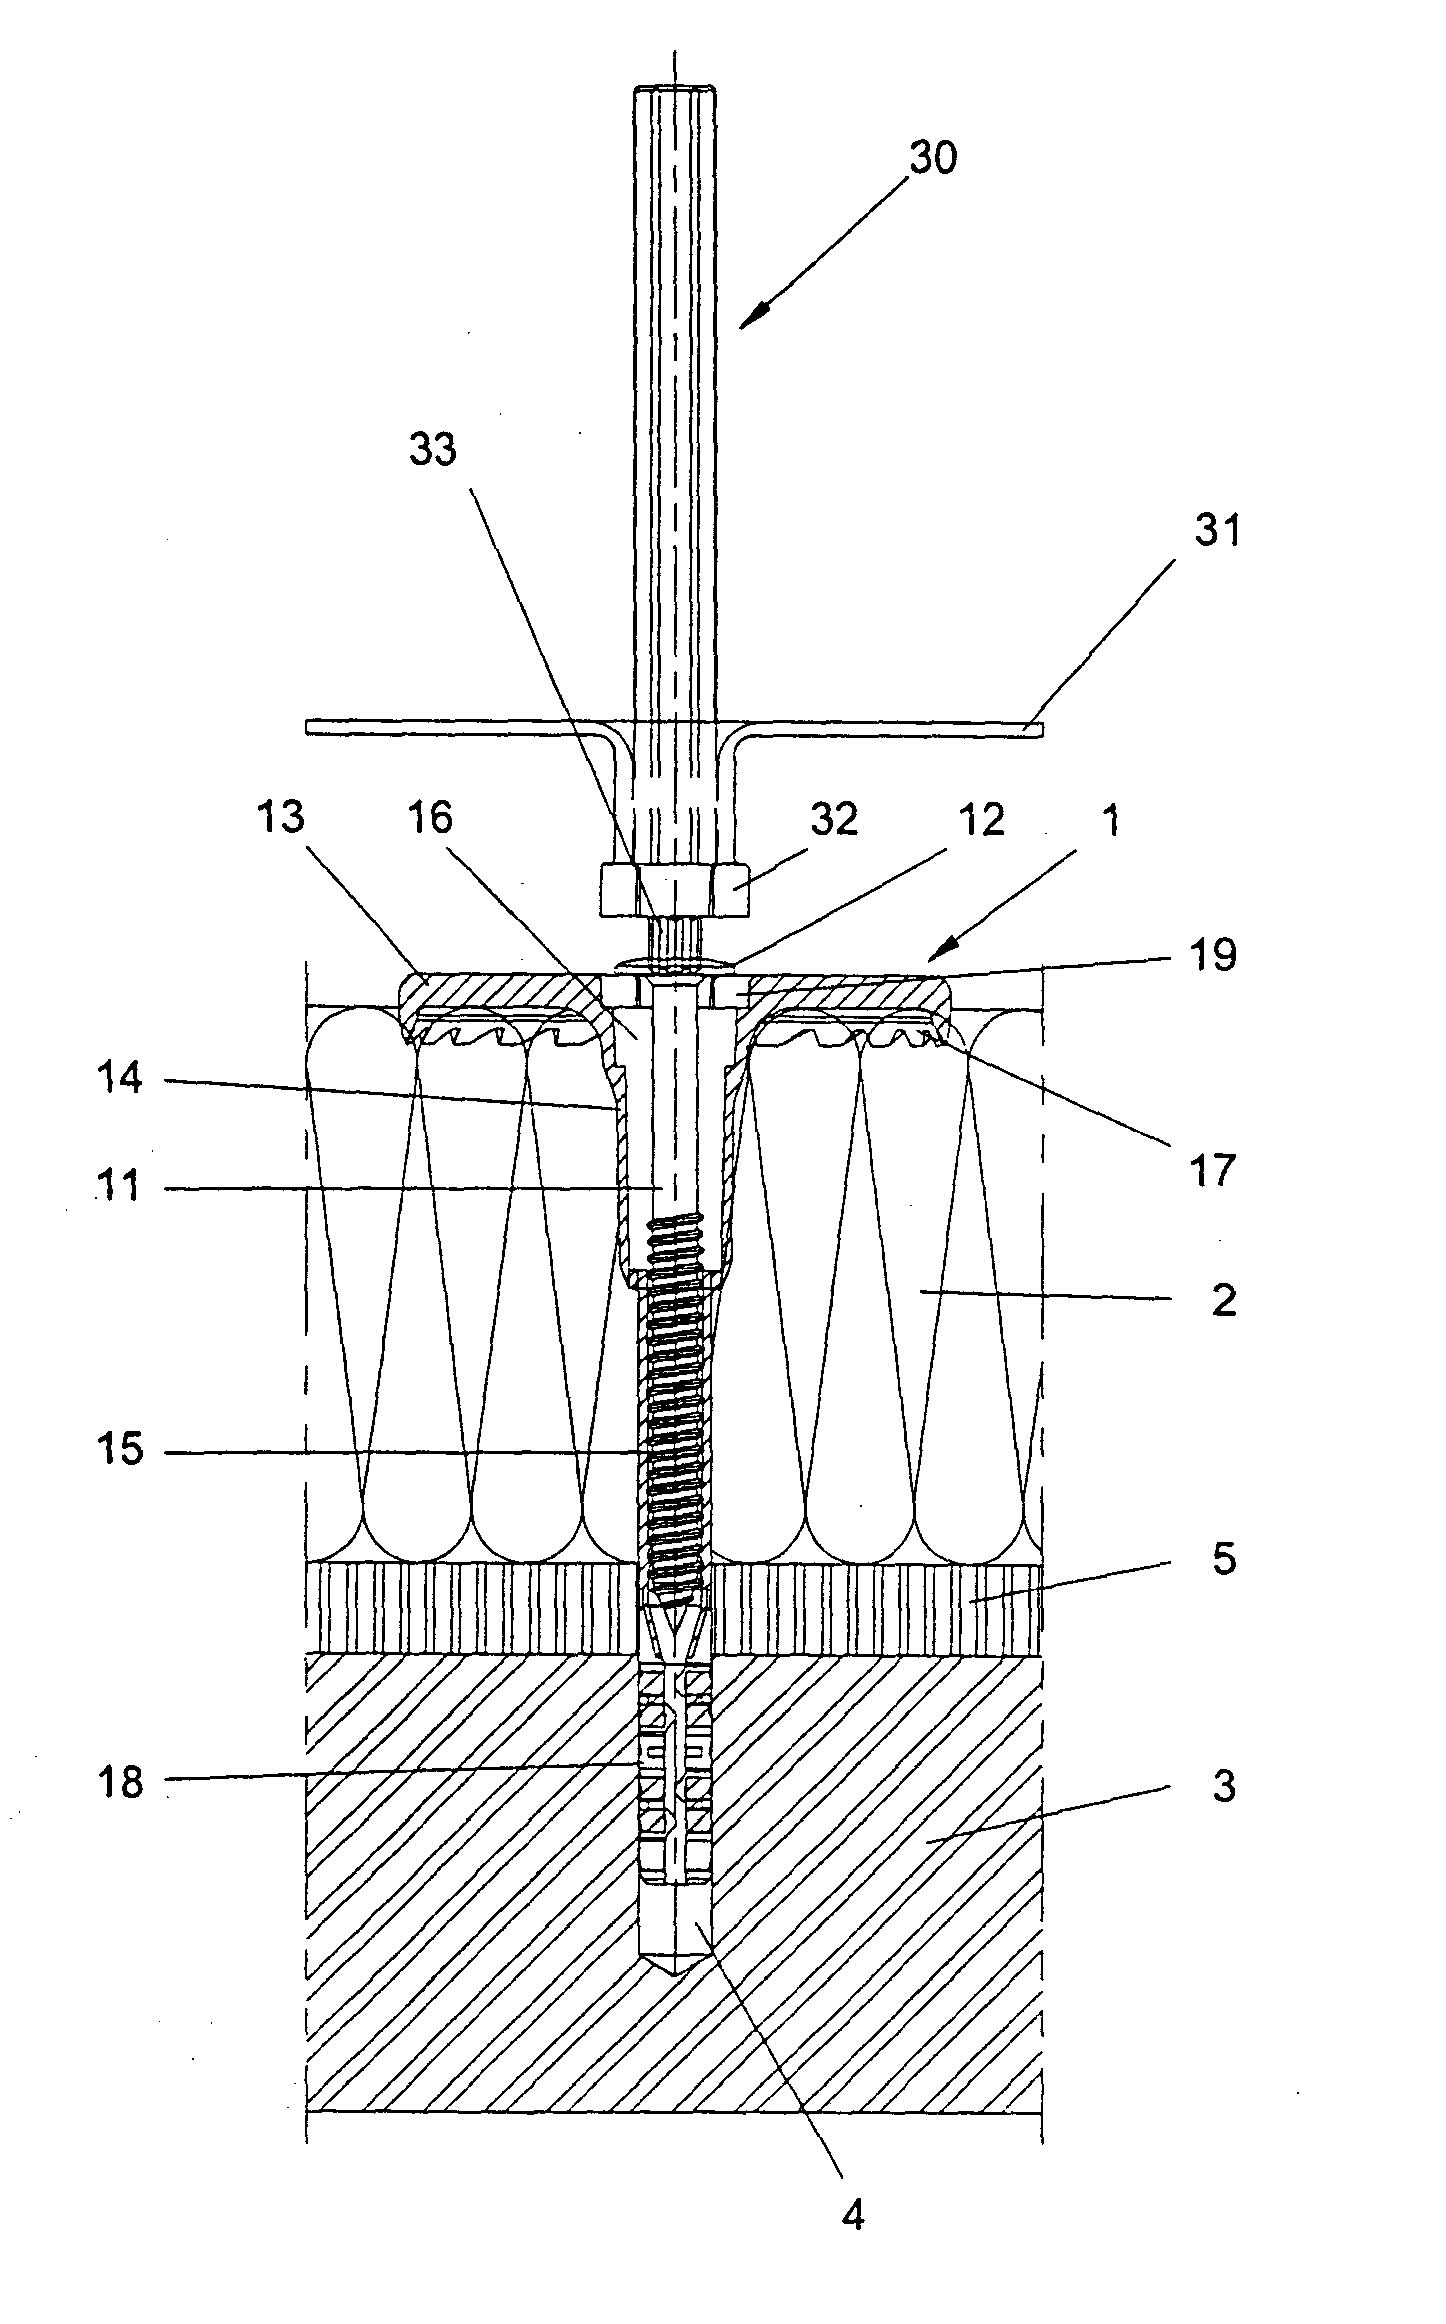 Dowels and methods for the assembly of insulating panels